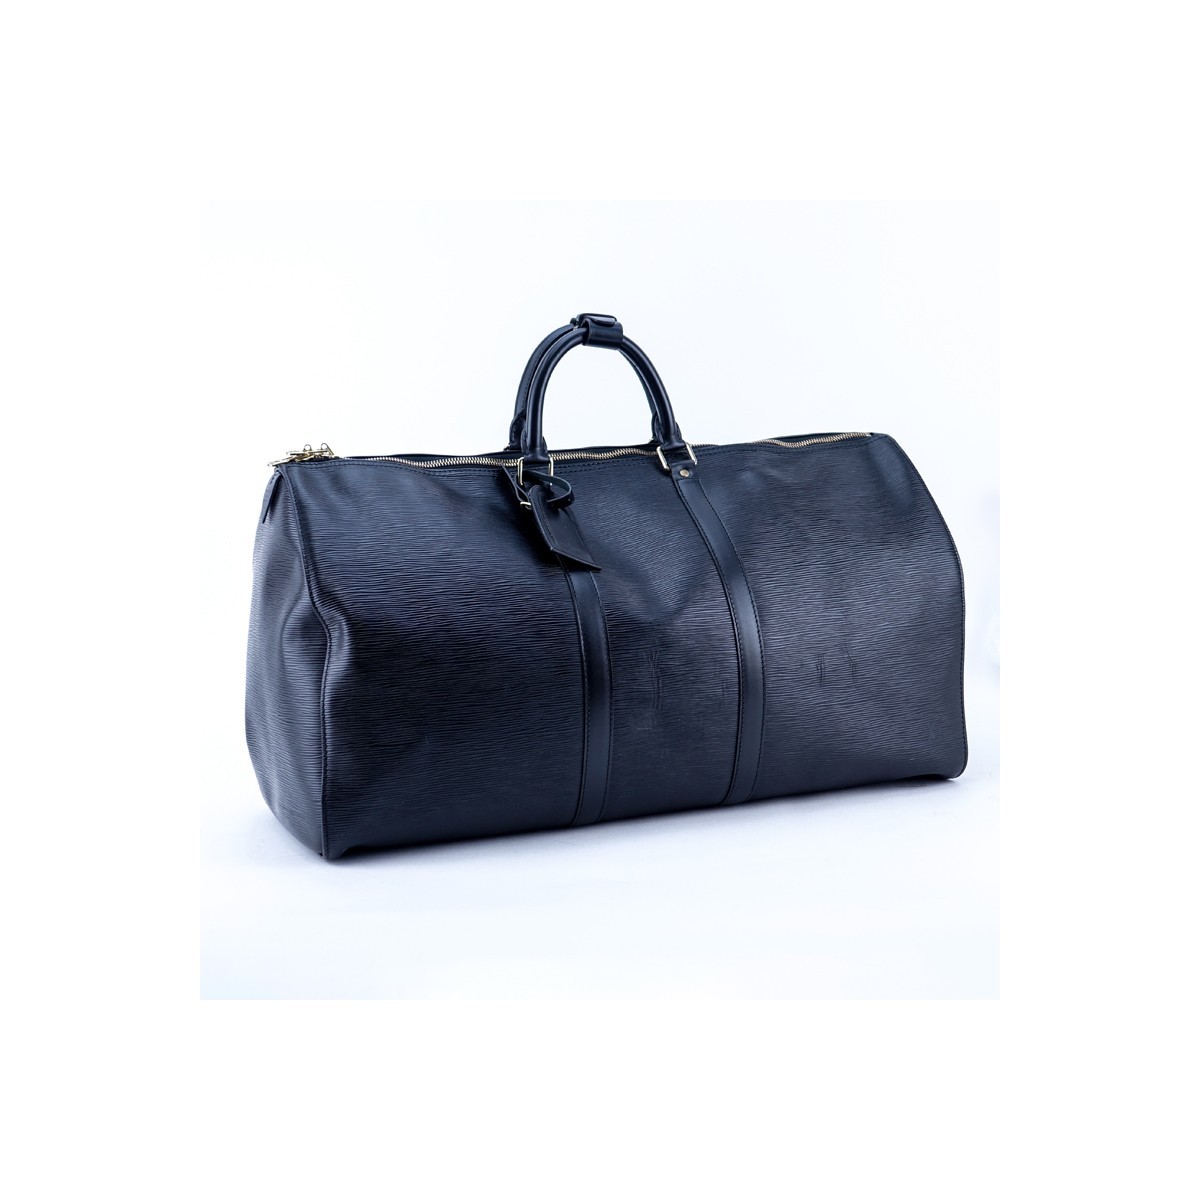 Louis Vuitton Black Epi Leather Keepall 55 Travel Bag. Golden brass hardware, leather interior, luggage tag, handle strap.